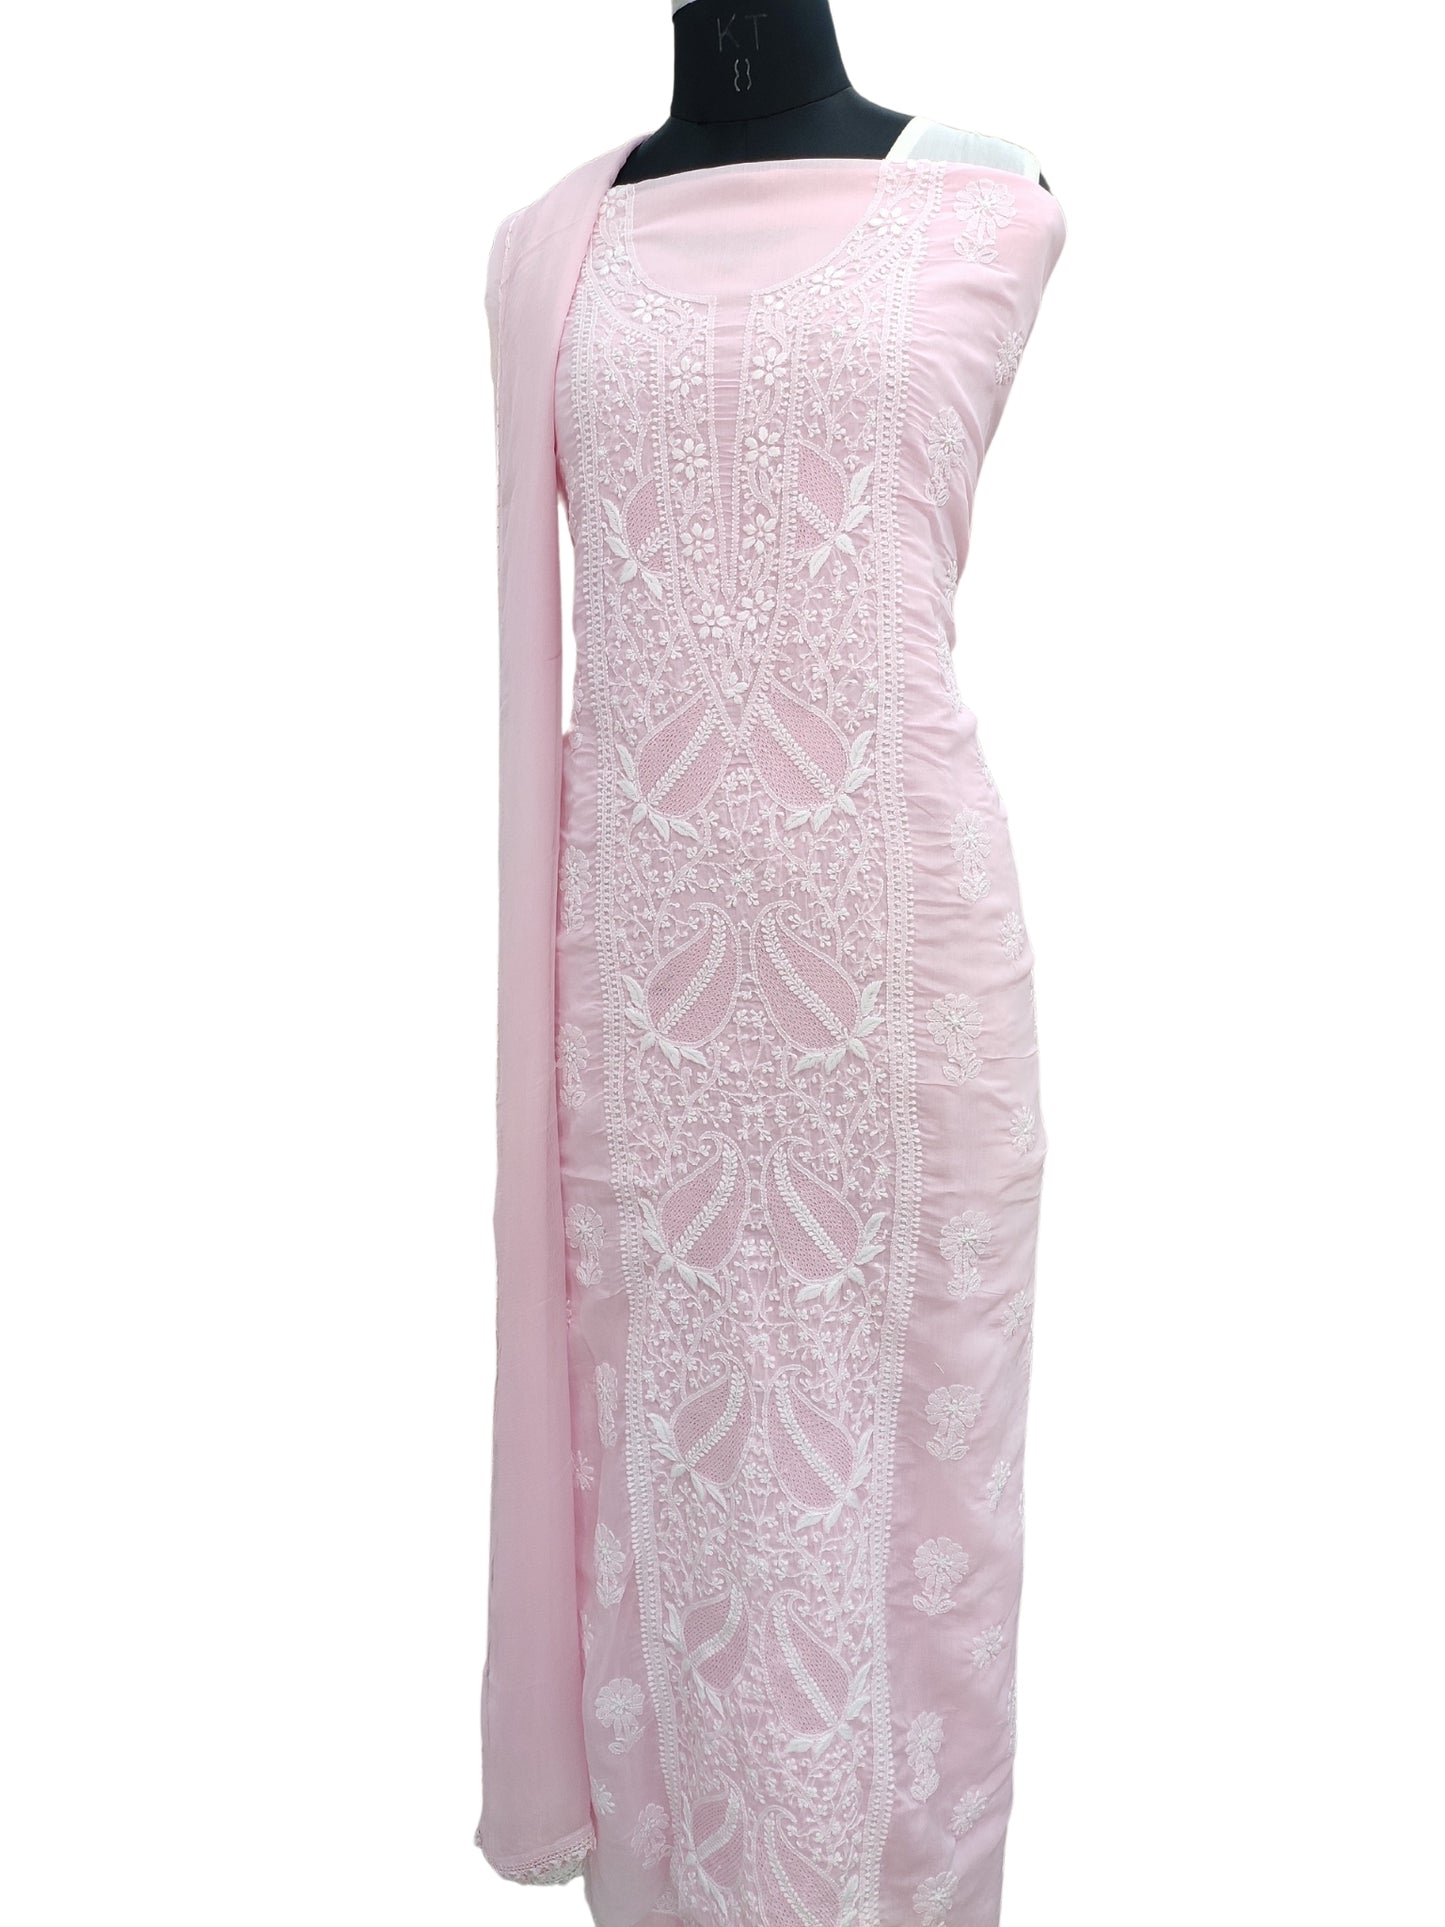 Shyamal Chikan Hand Embroidered Pink Cotton Lucknowi Chikankari Unstitched Suit Piece With Jaali Work- S22213